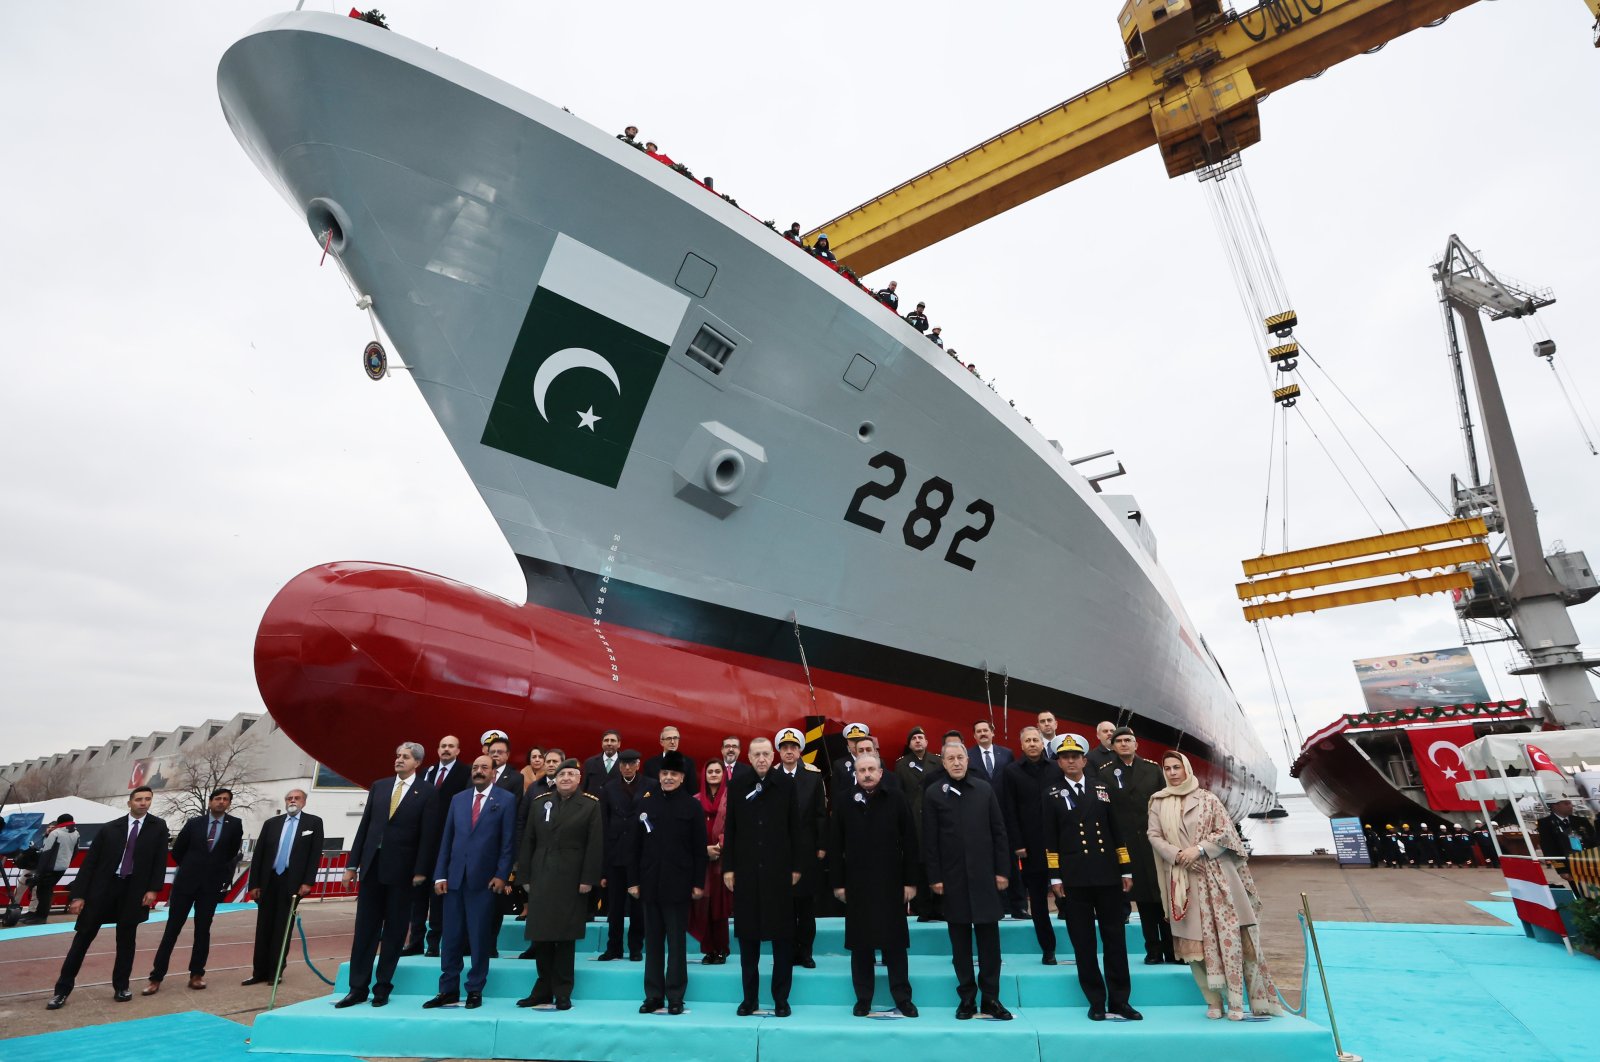 President Recep Tayyip Erdoğan (C), Pakistani Prime Minister Shahbaz Sharif (4th from L) and other officials are seen during the launching ceremony for PNS Kaibar, the third of the four MILGEM corvettes built by Türkiye for Pakistan, in Istanbul, Türkiye, Nov. 25, 2022. (AA Photo)